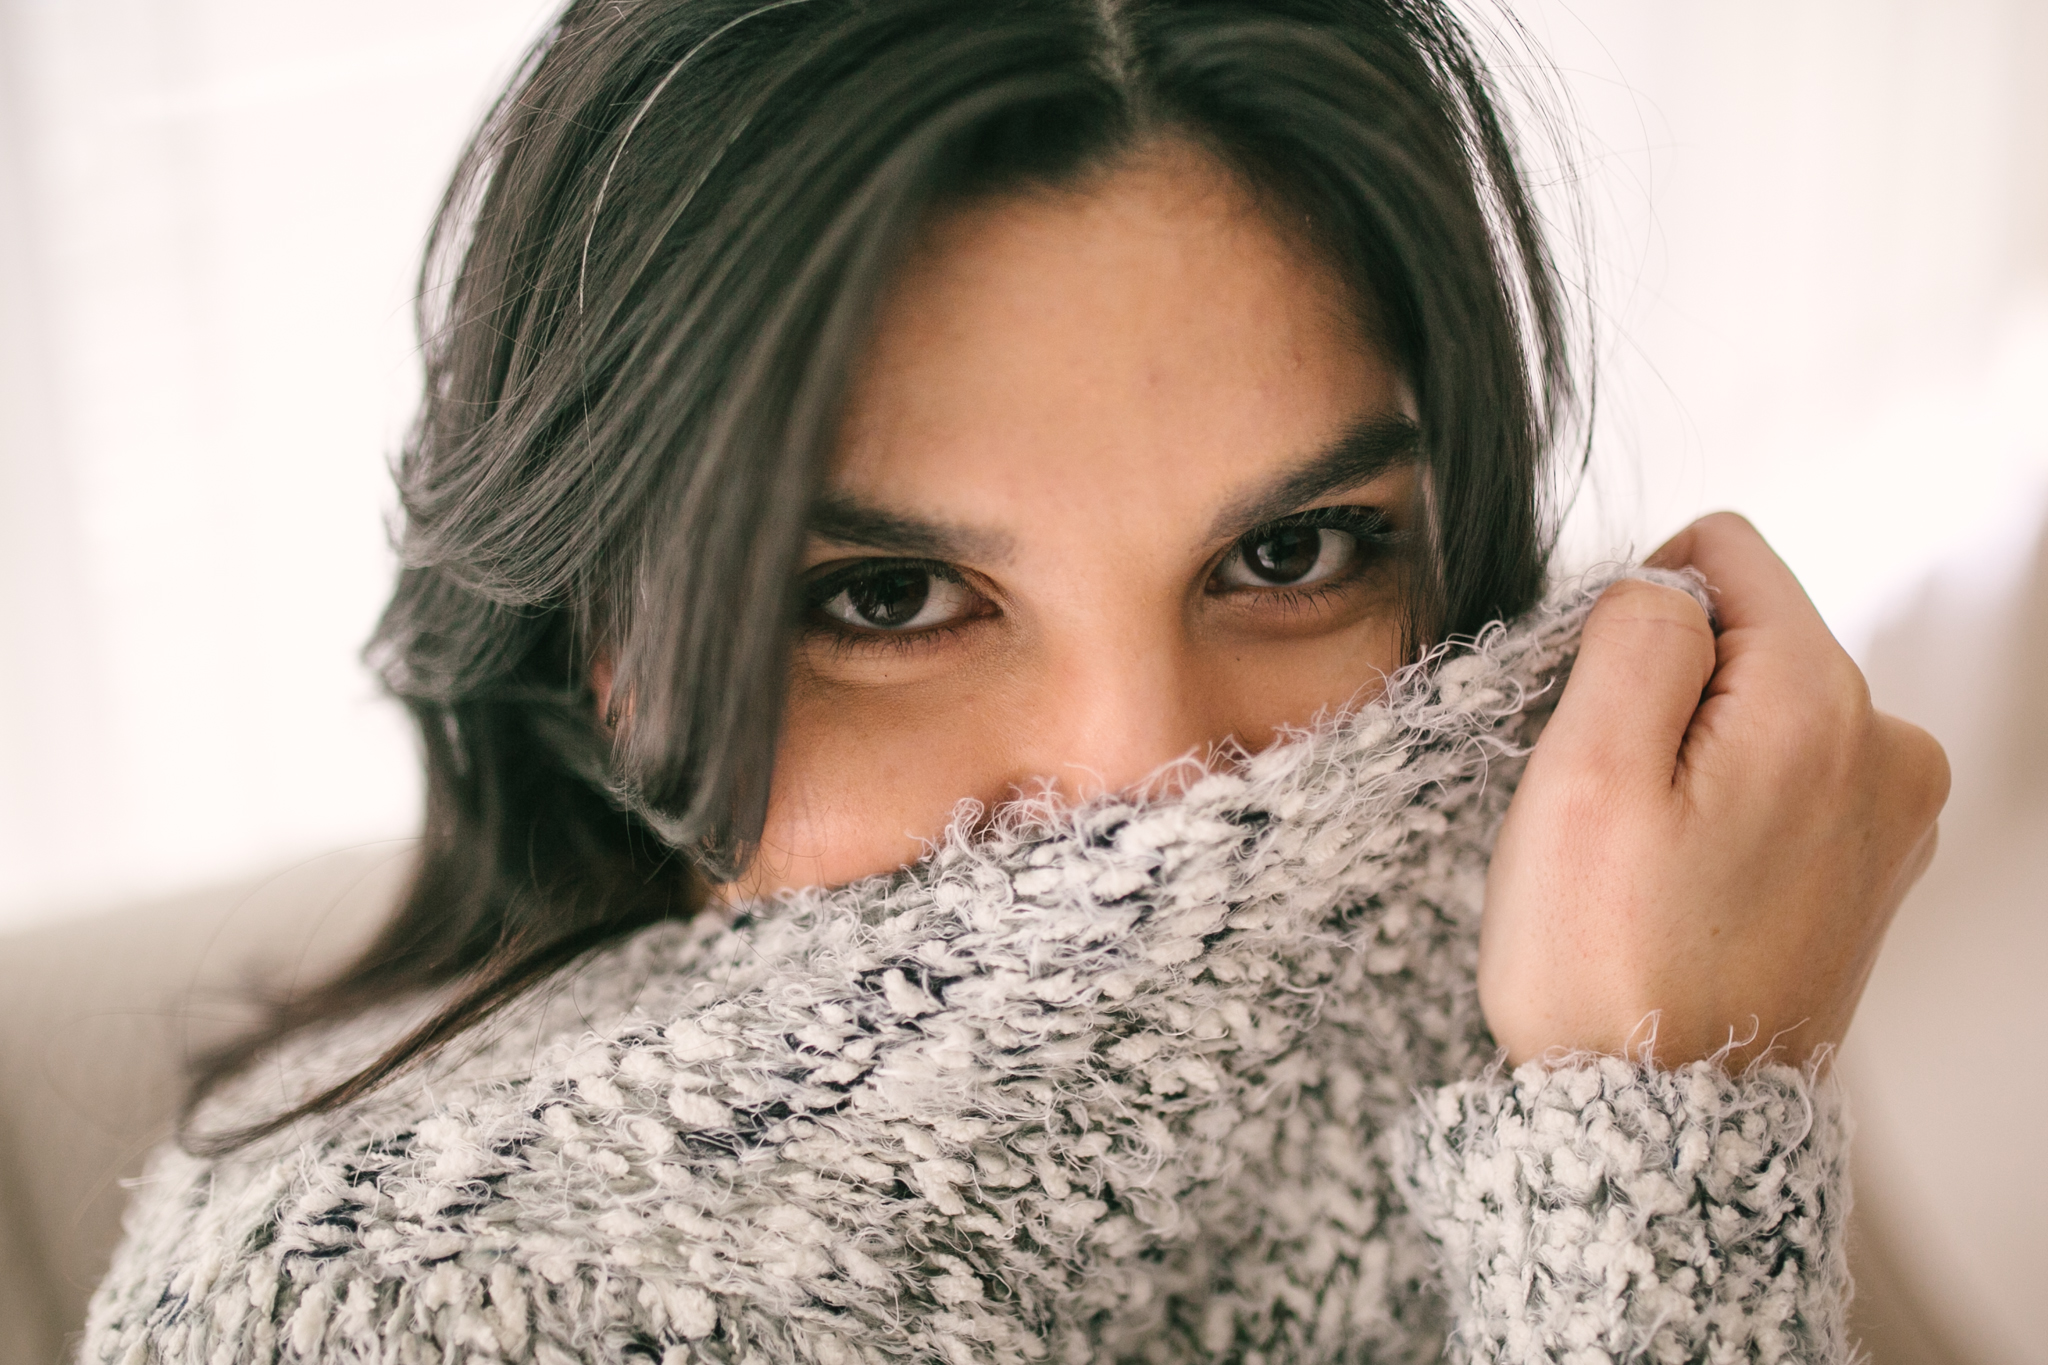 Peeking out from sweater headshot at boudoir photo session